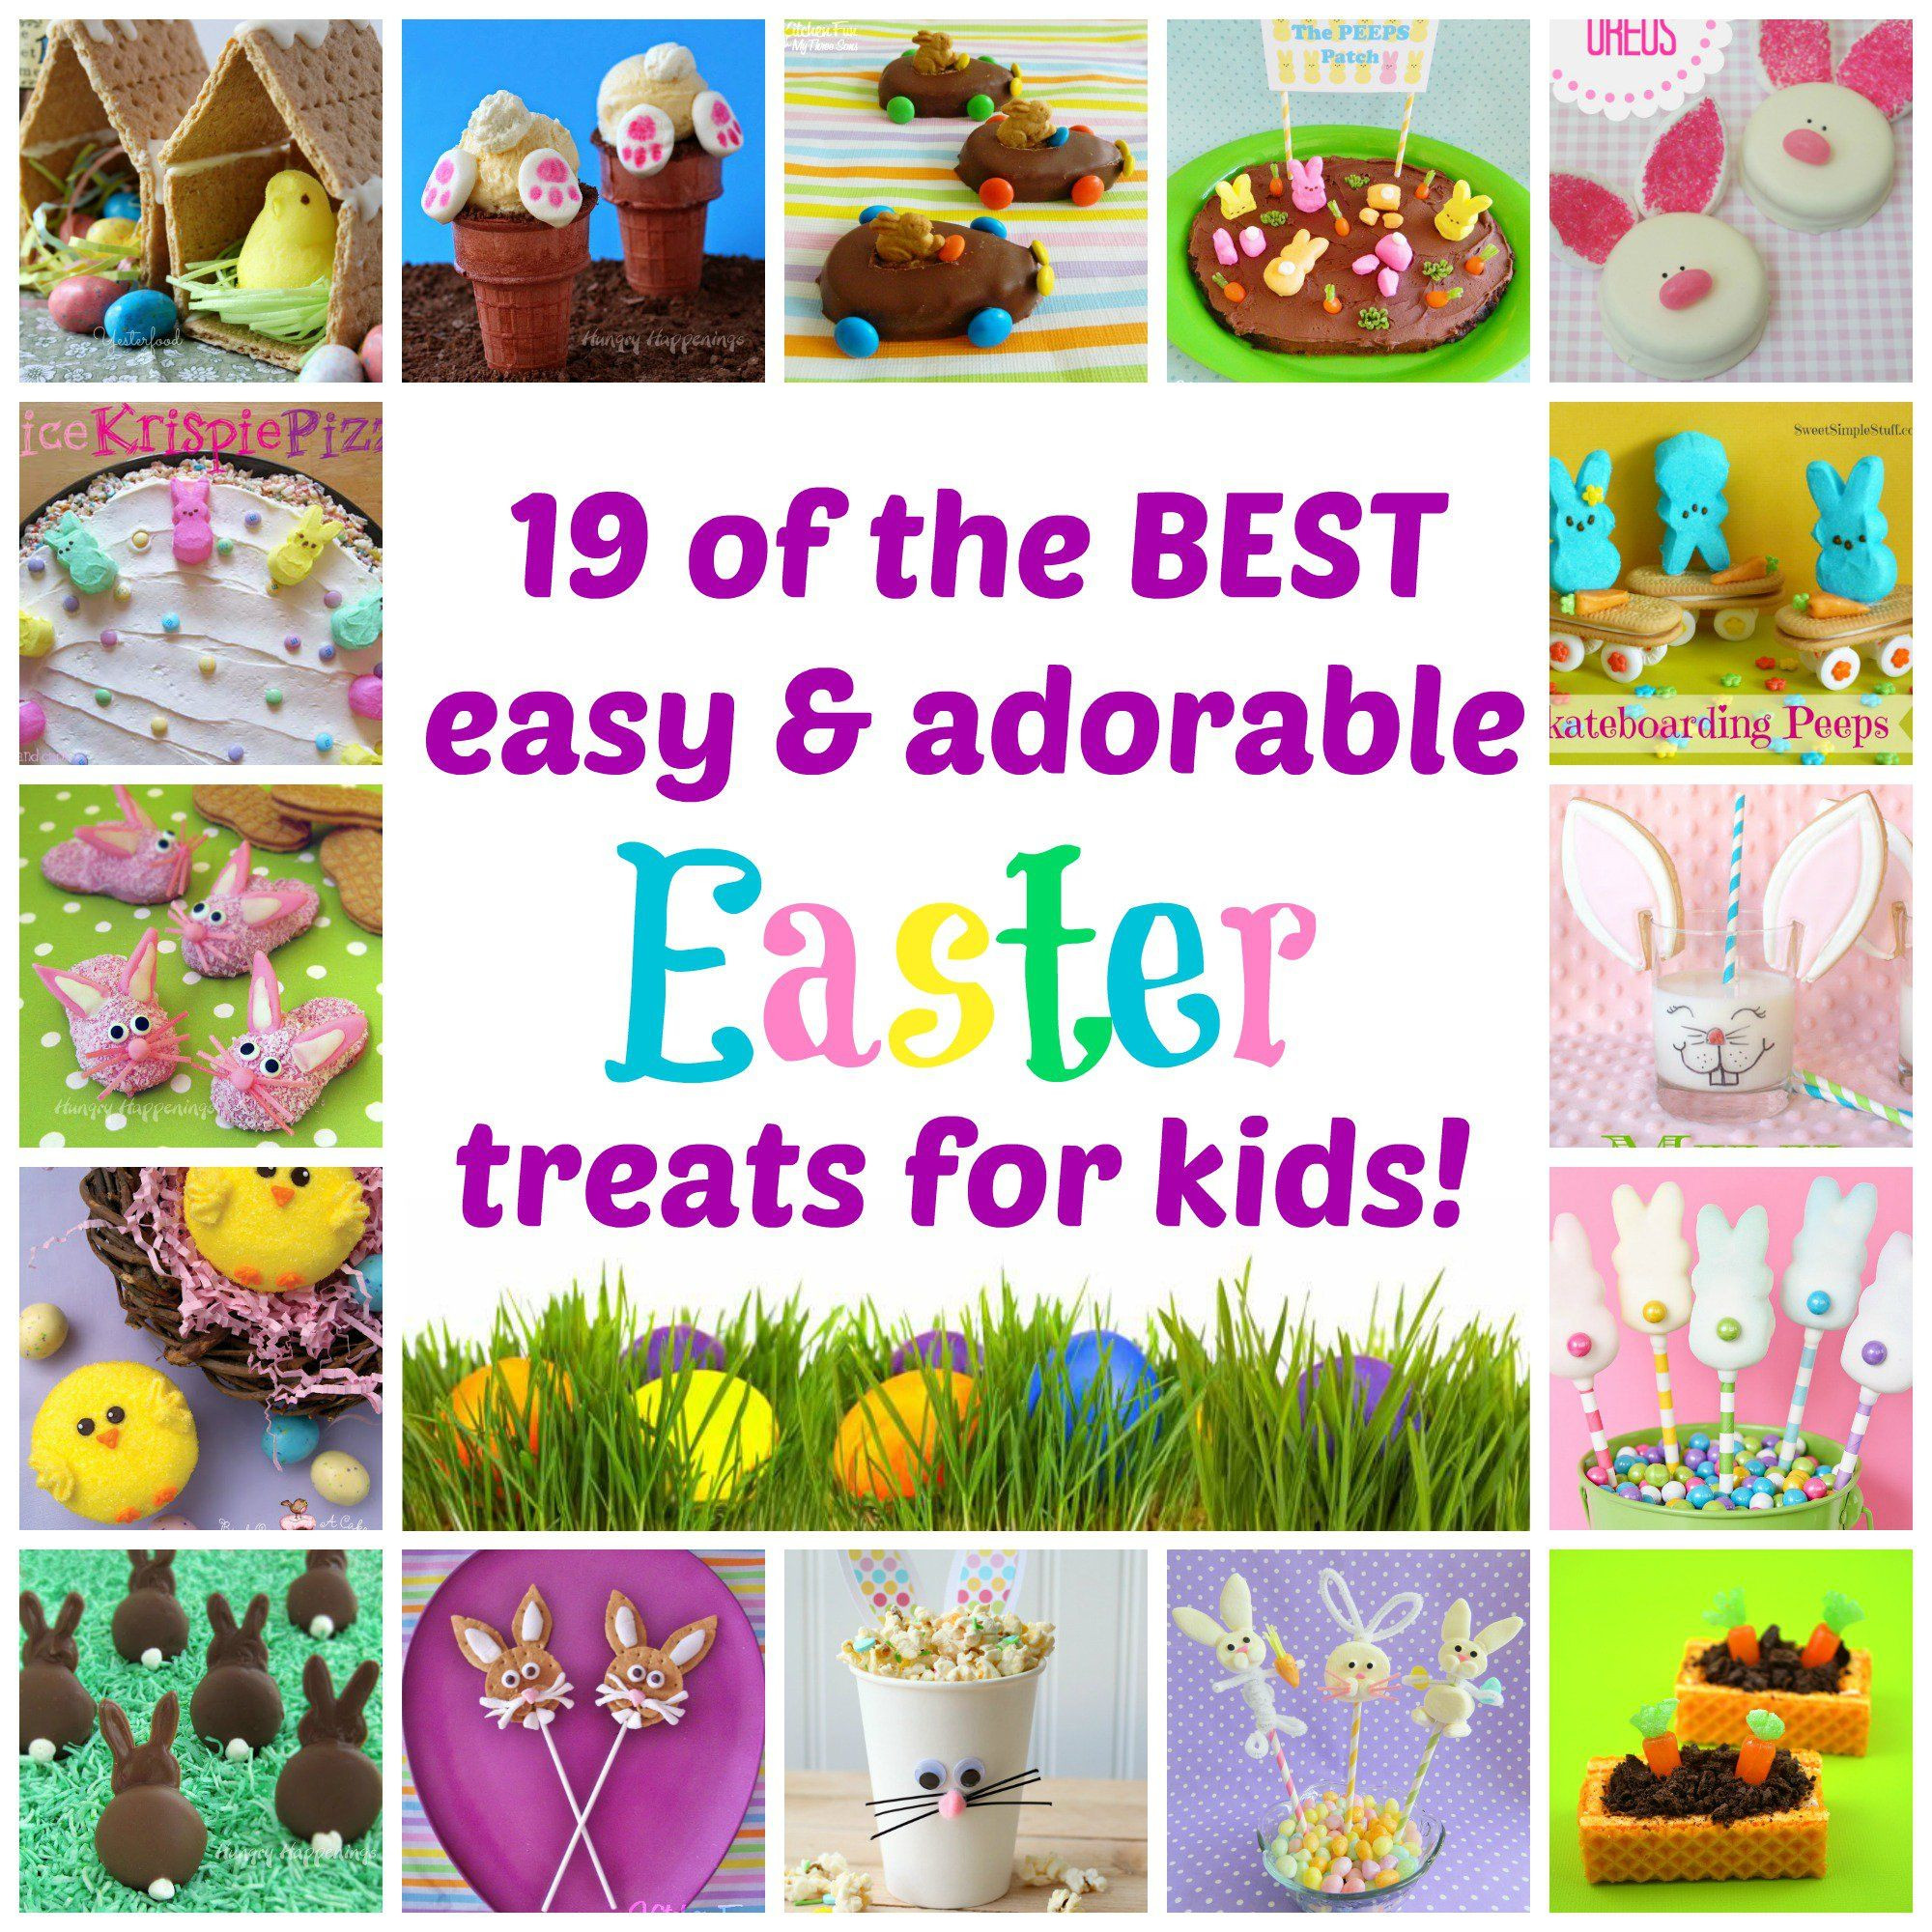 Easy Easter Desserts For Kids
 19 of the BEST easy & adorable Easter treats for kids